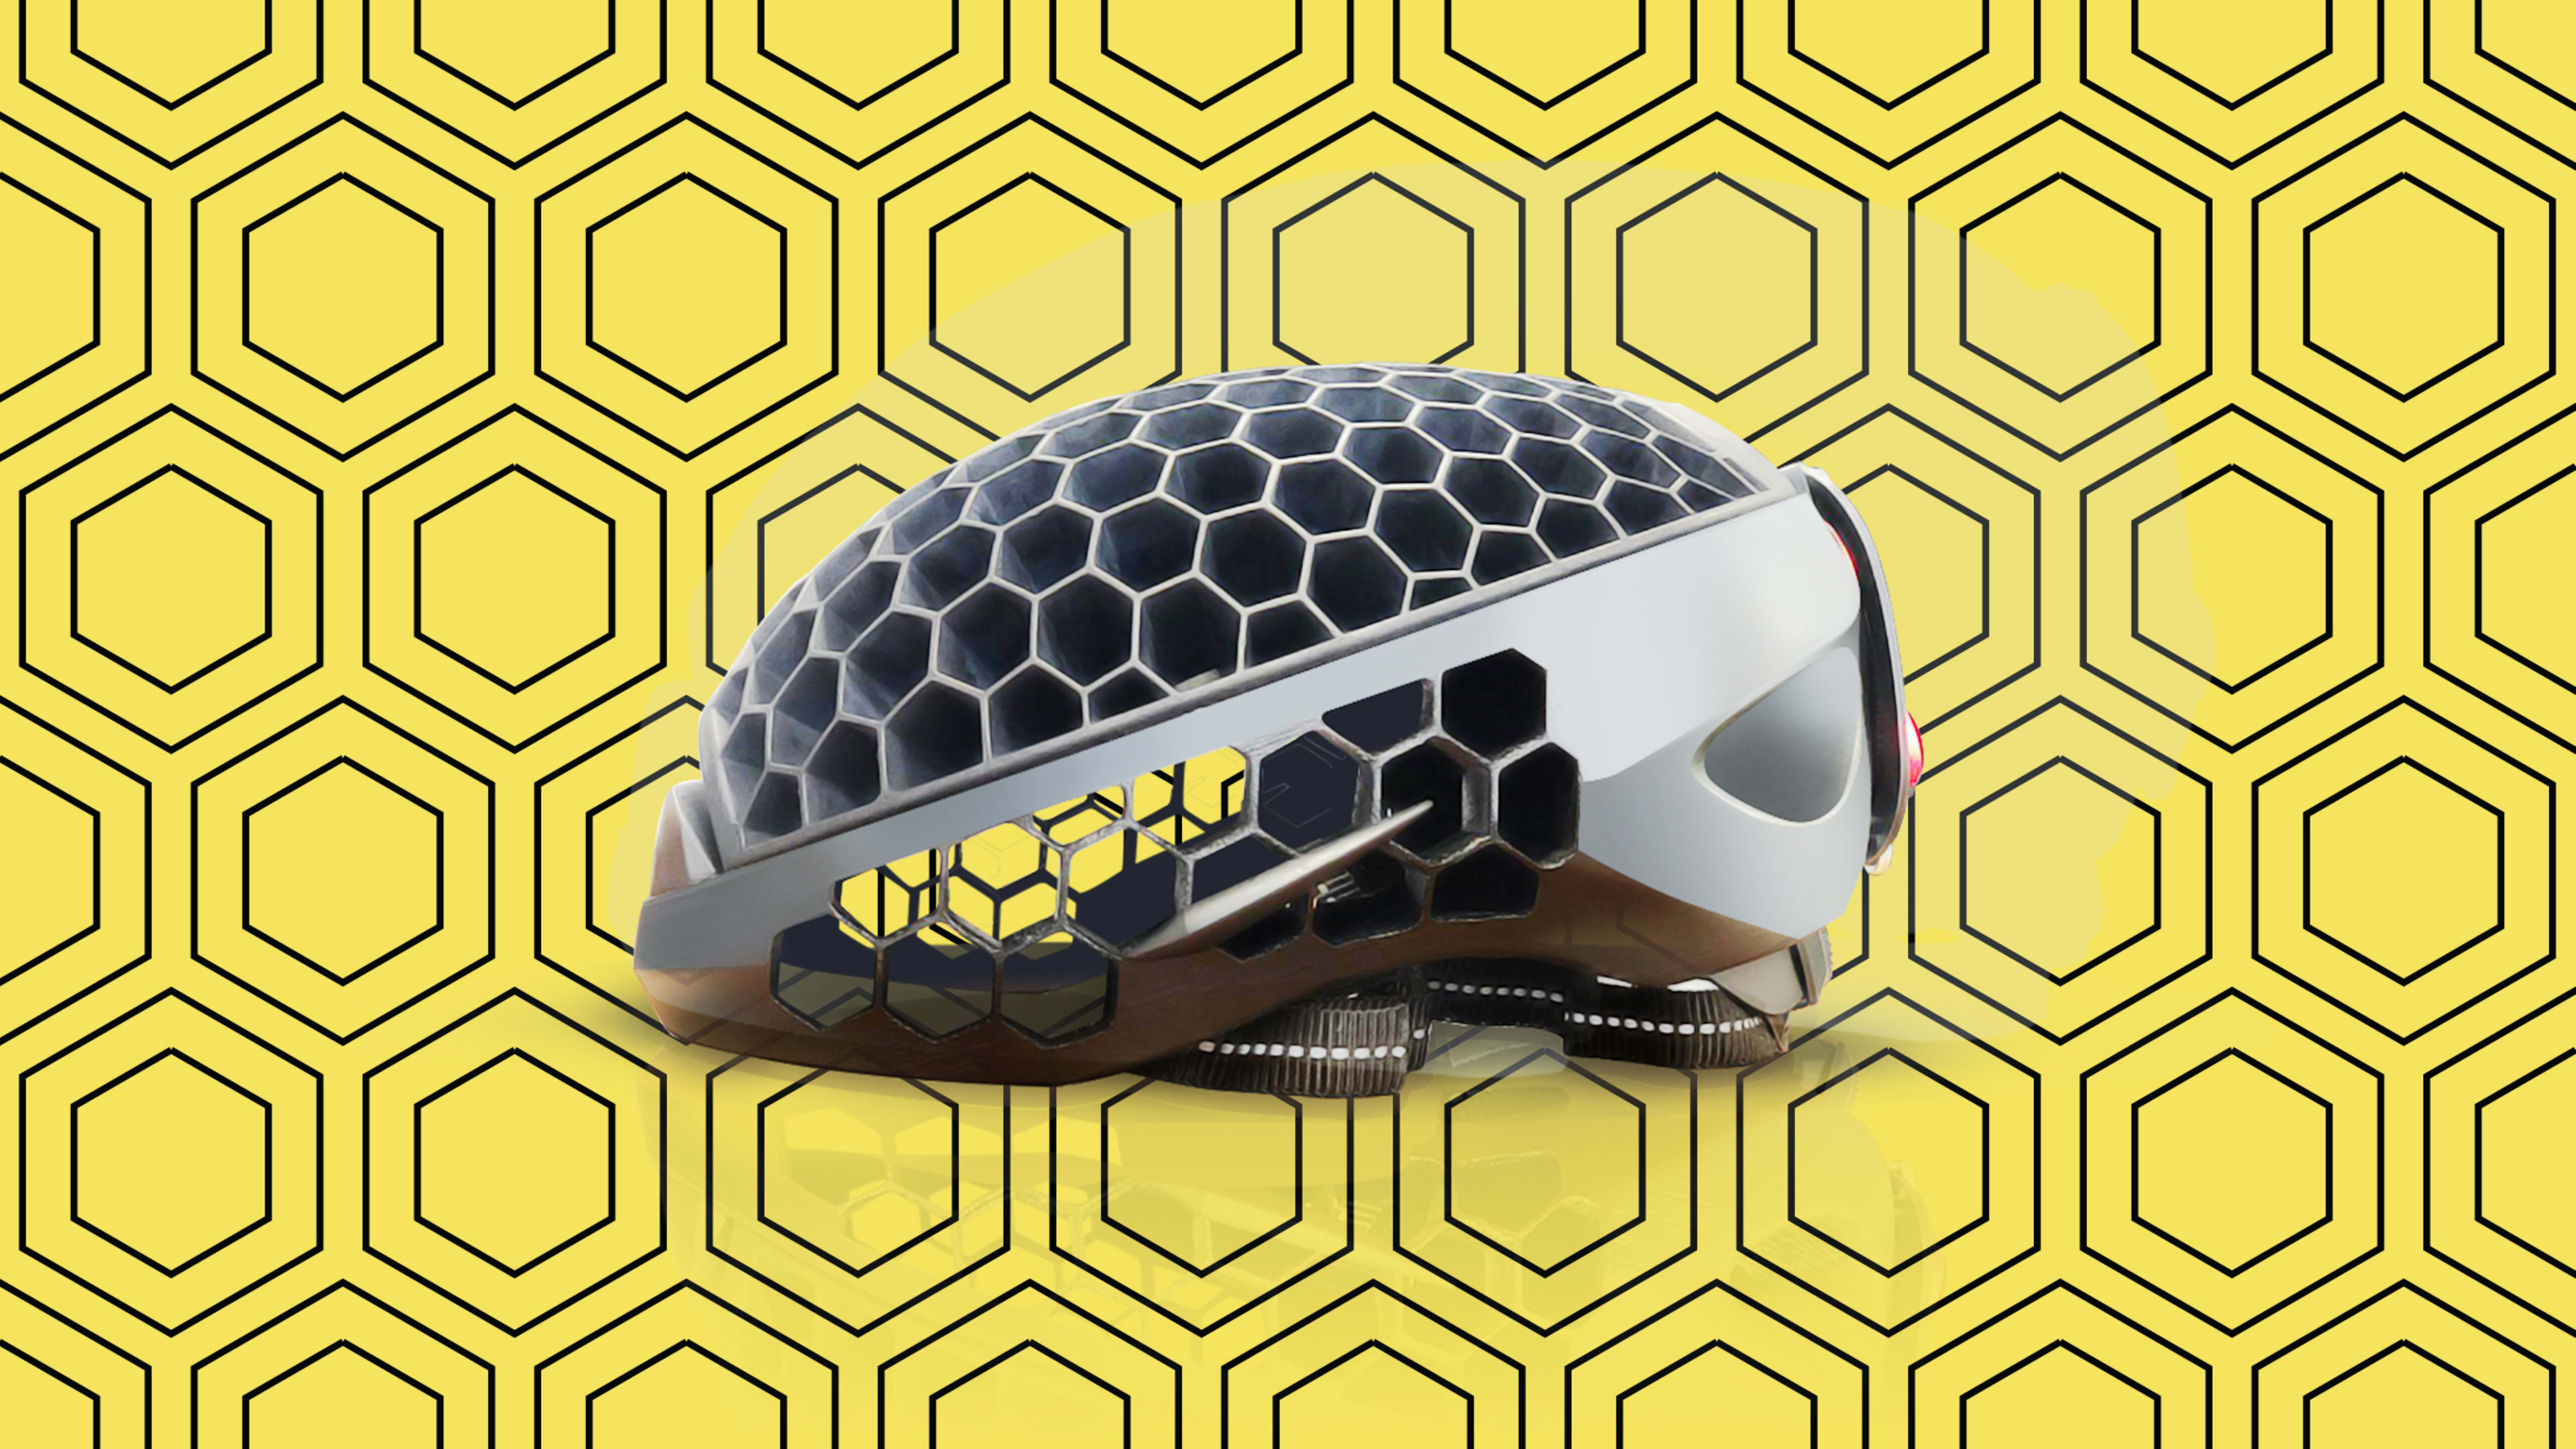 This honeycomb-shaped bike helmet folds to fit in your bag